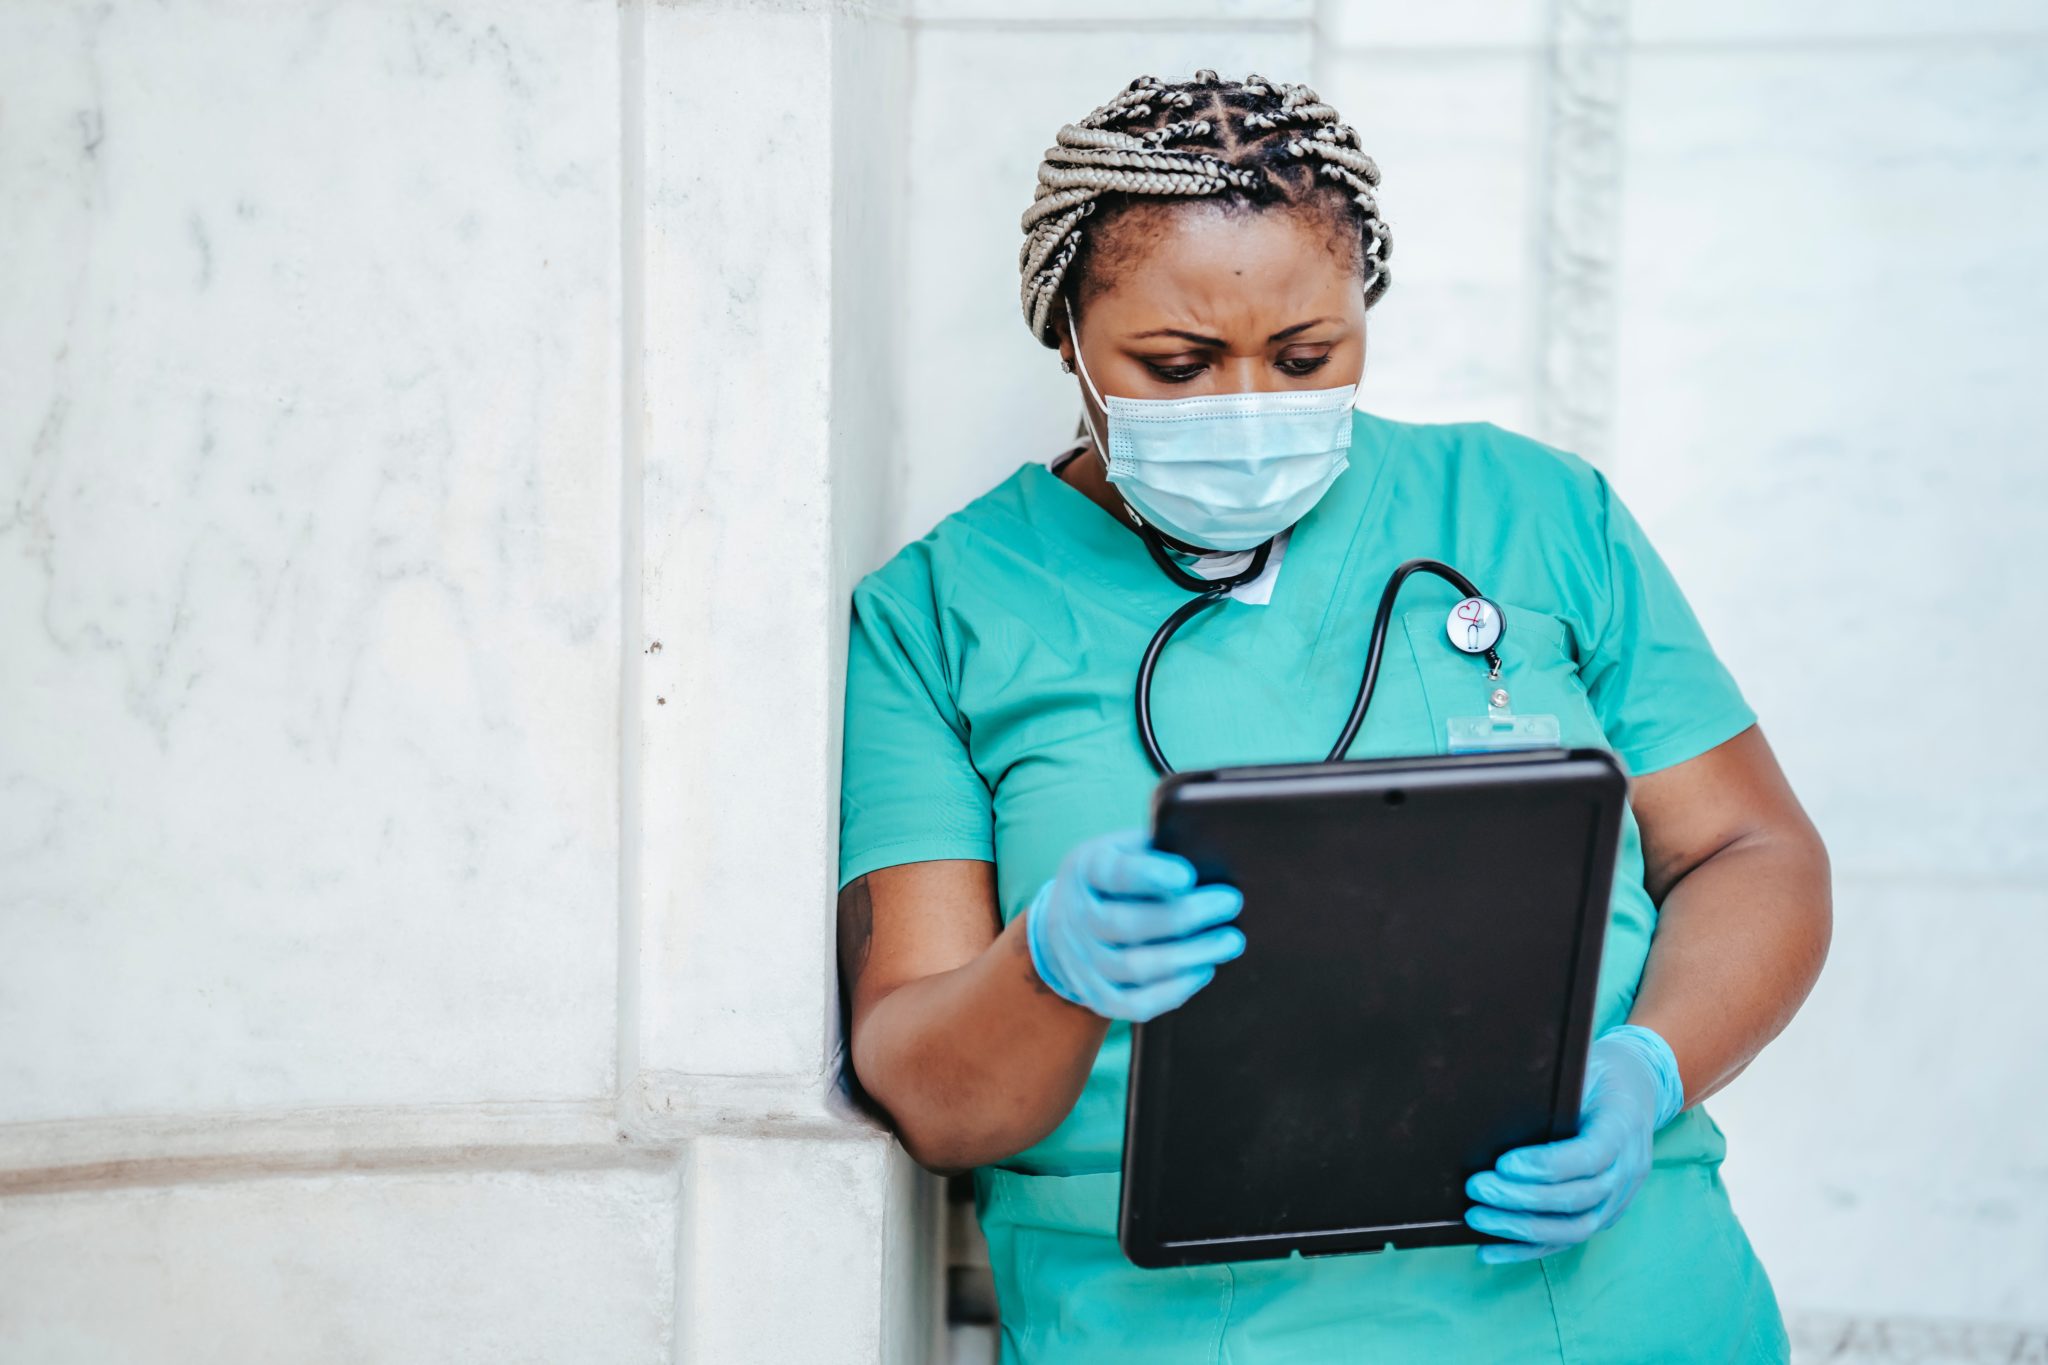 A Black doctor or nurse wearing a stethoscope looks at a tablet that they are holding while wearing gloves.